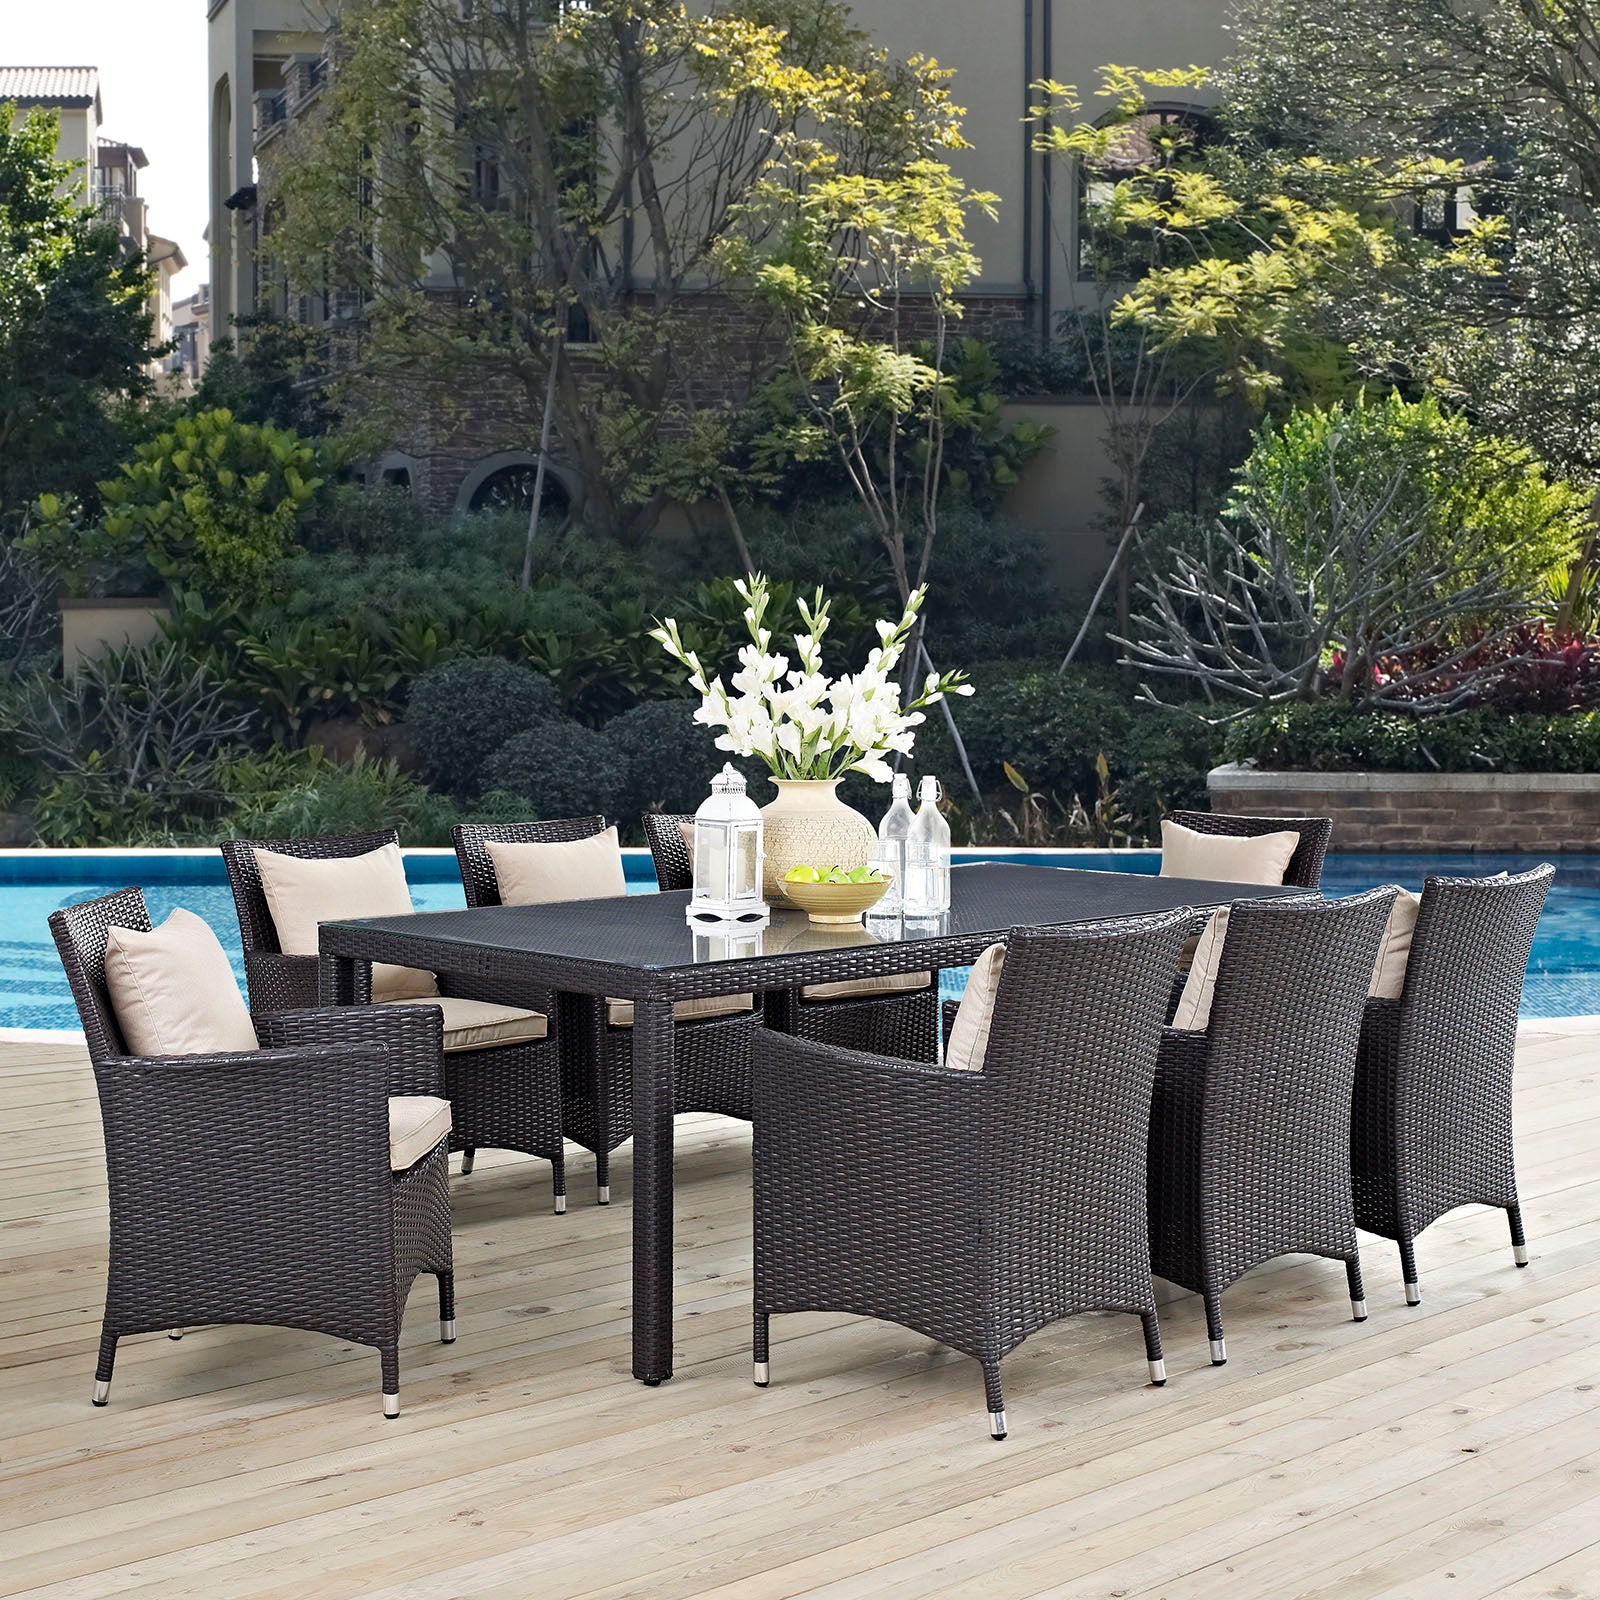 Convene 9 Piece Outdoor Patio Dining Set - East Shore Modern Home Furnishings